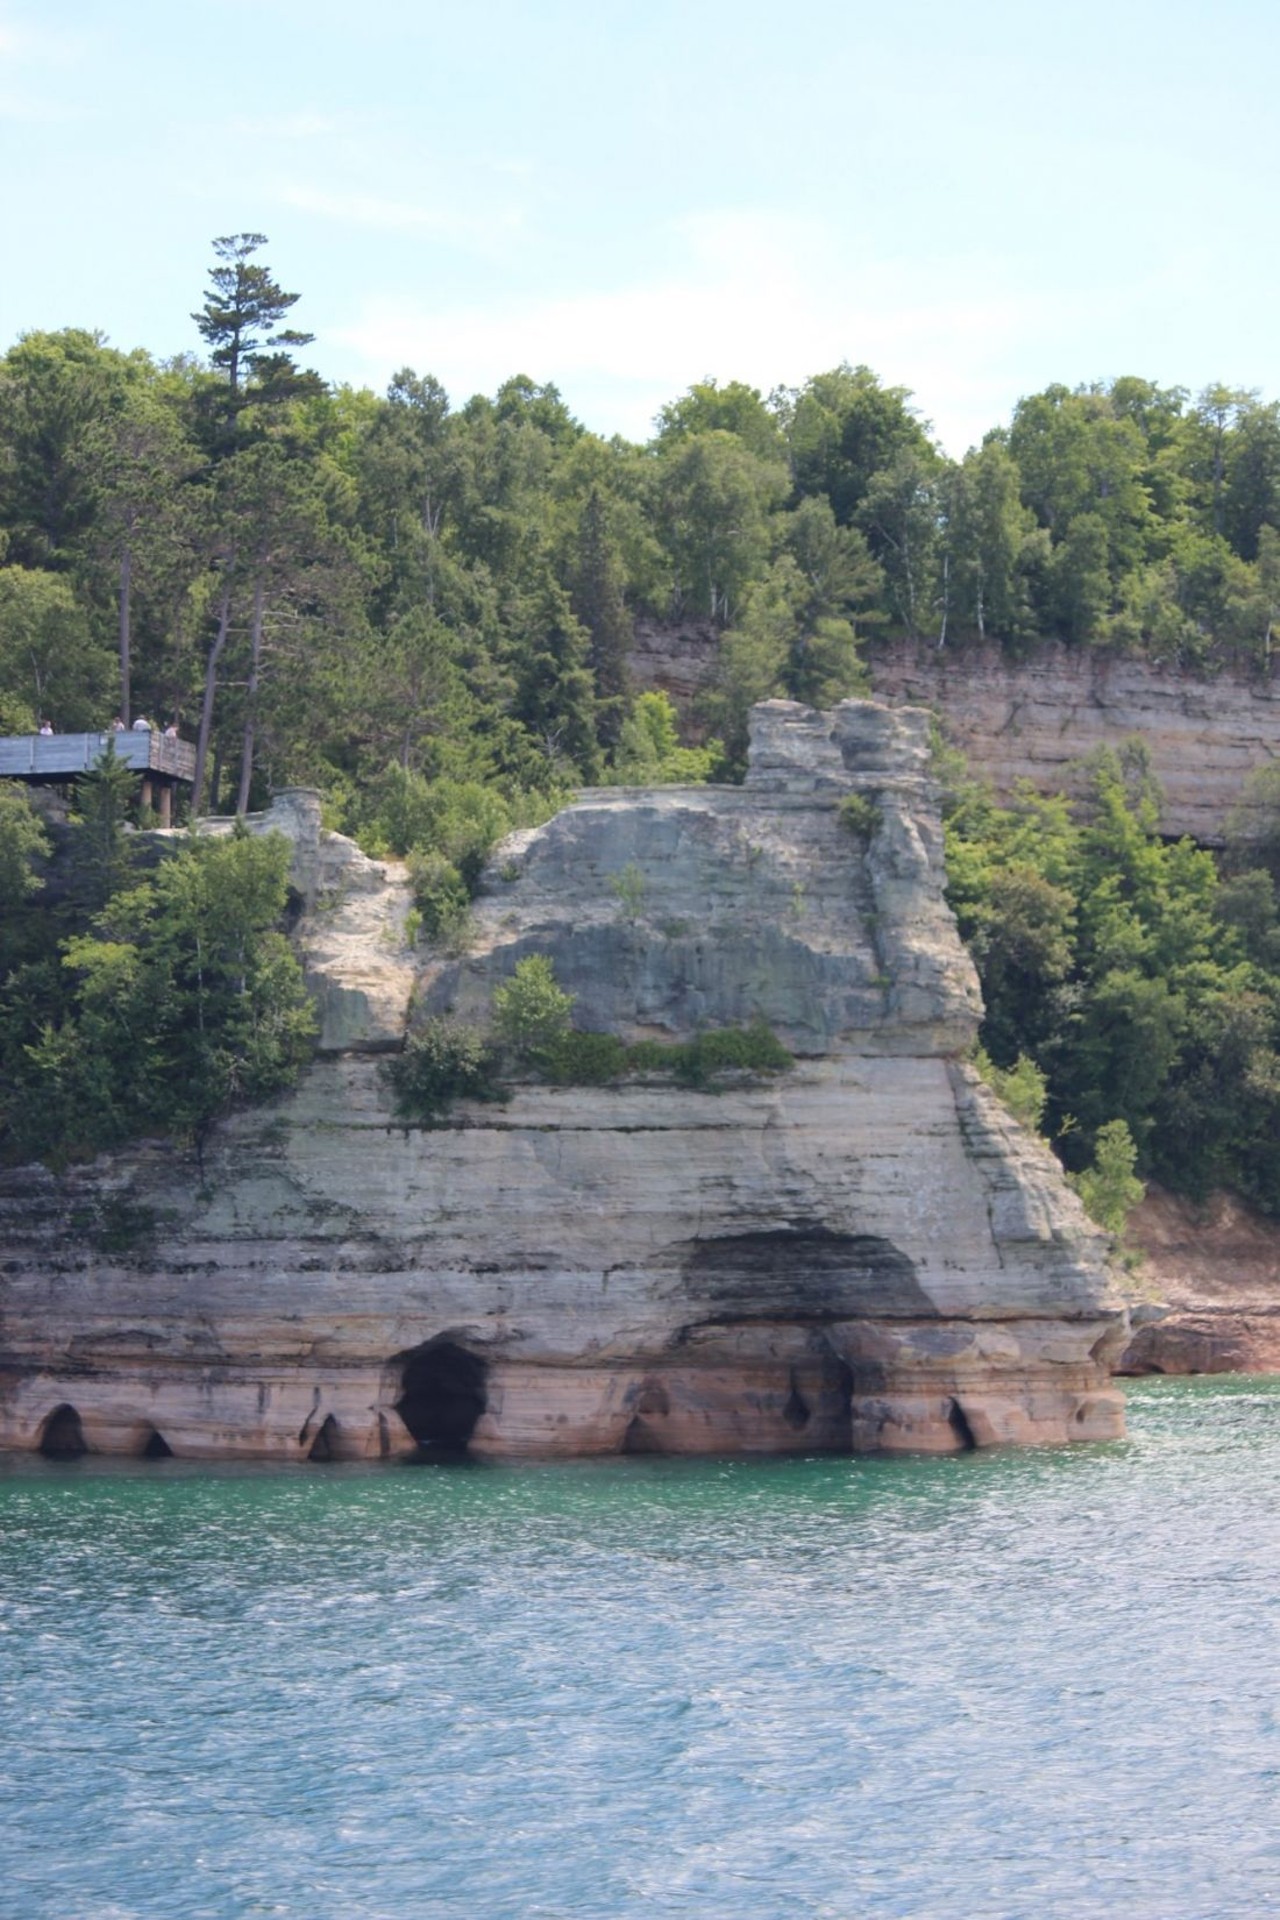 Miners Castle Rock Pictured Rocks National Lakeshore
There&#146;s tons to do at the most famous formation of Pictured Rocks. Beach-walking (with gorgeous views), trail-hiking, and kayak tours are all available. If you&#146;re feeling extra gutsy, check out some of the formation&#146;s natural caves.
Photo via TripAdvisor user Mrs P